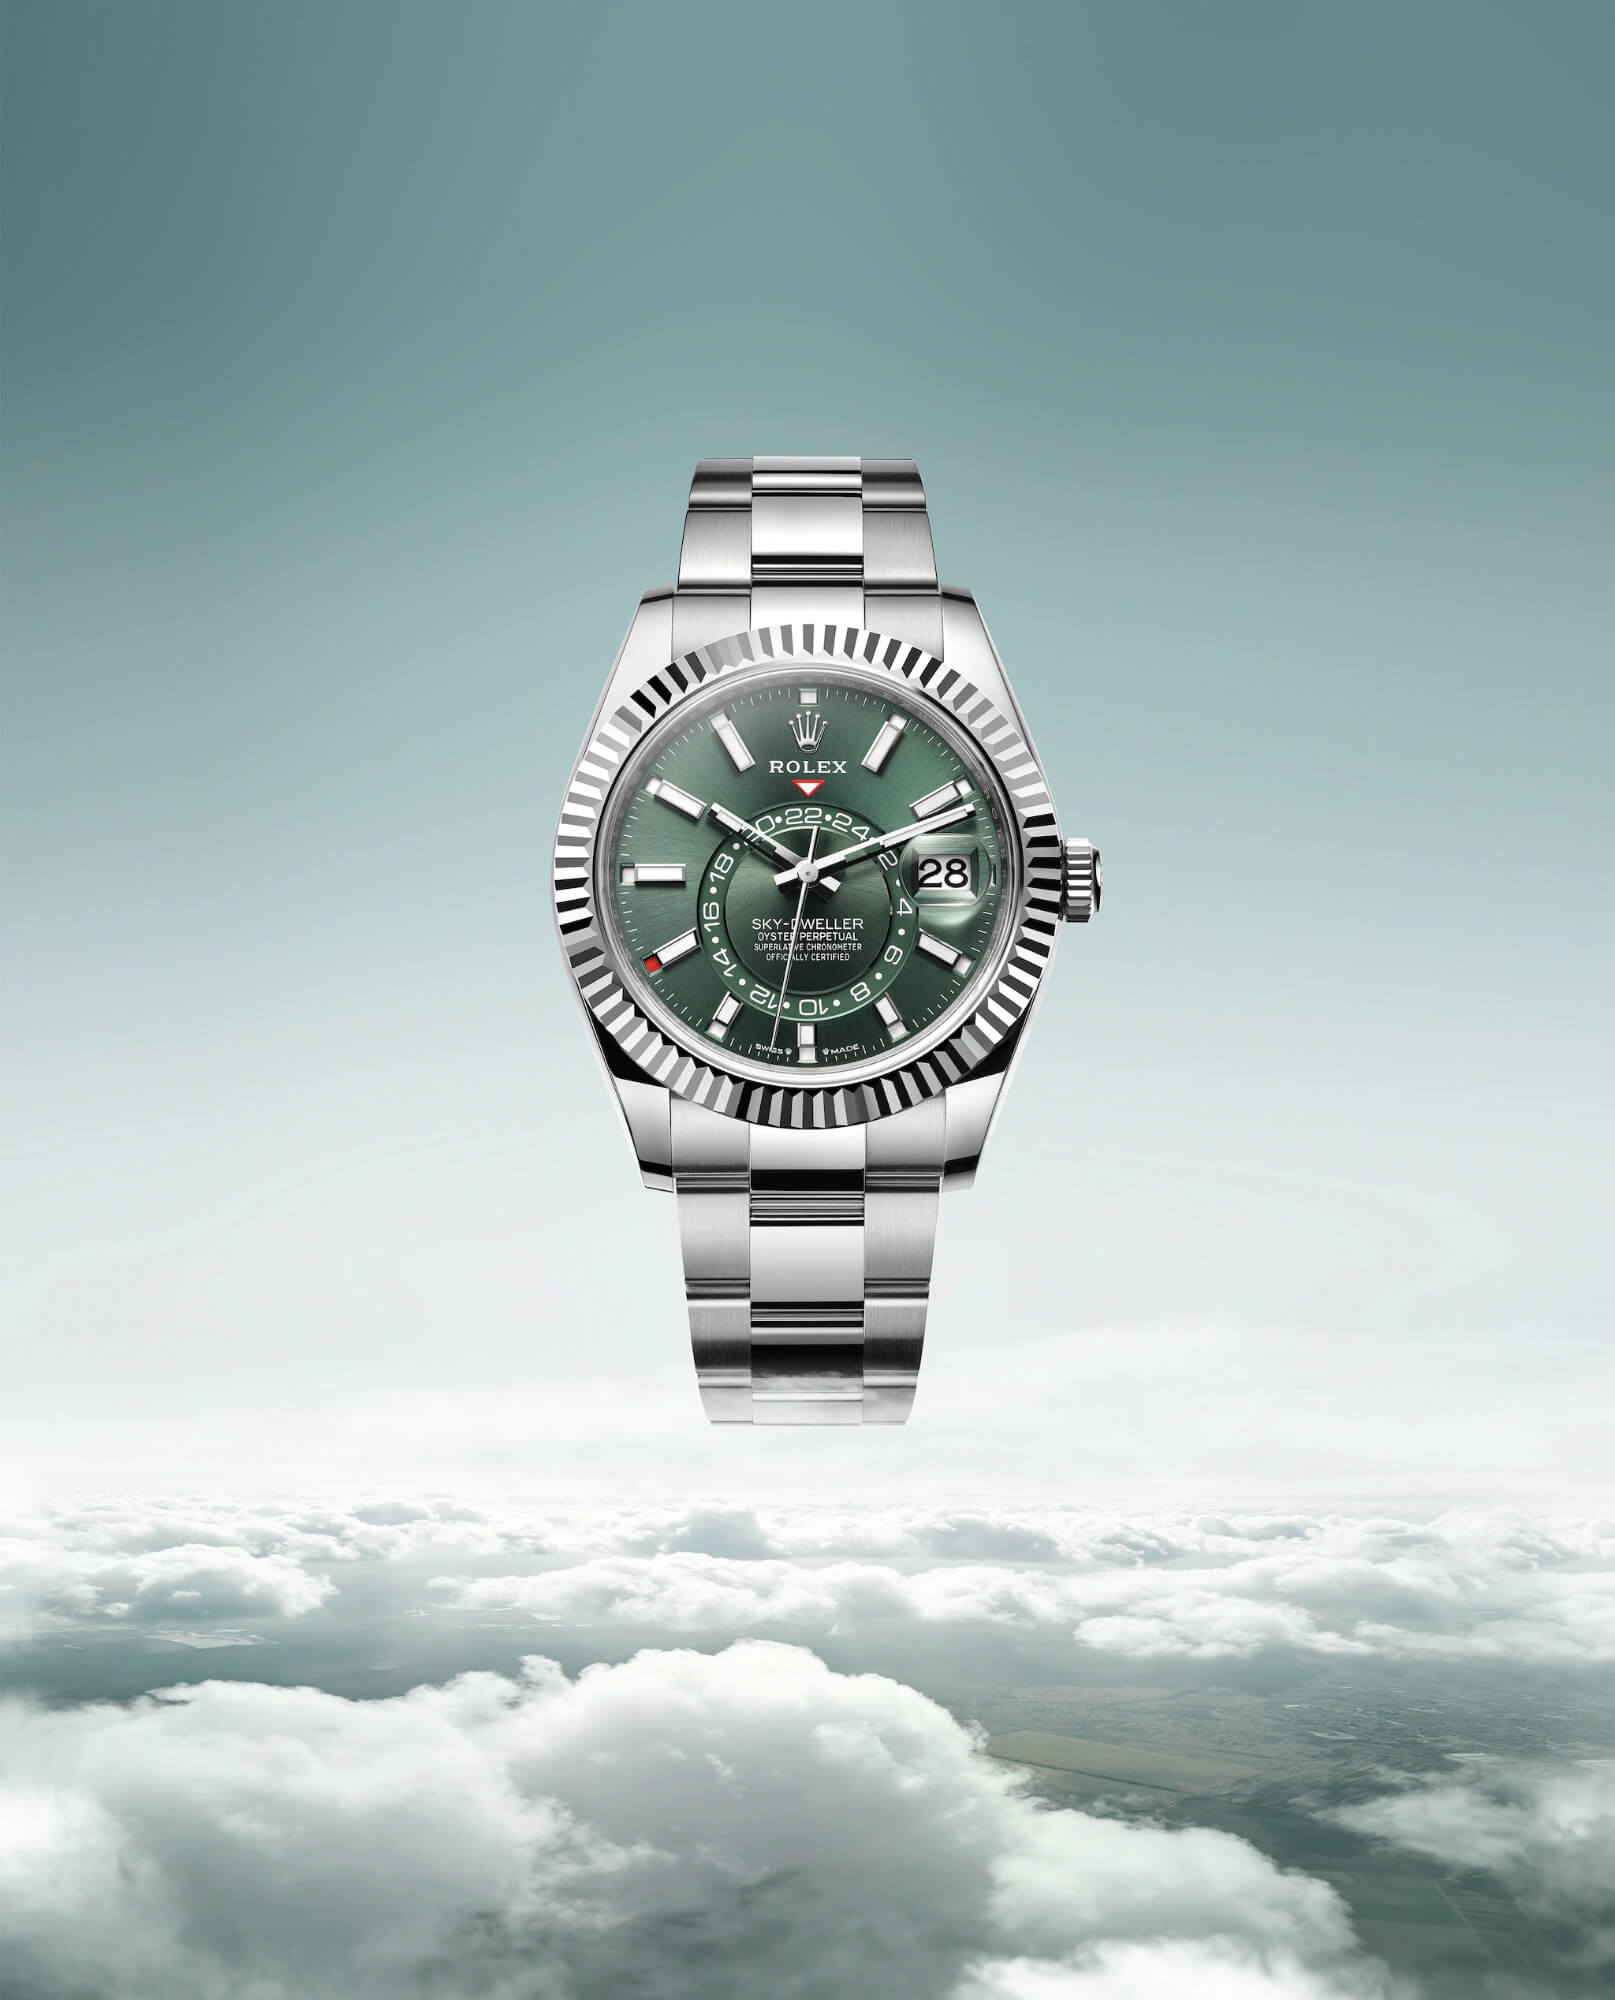 First Look: Rolex Releases New Watches Updated Movements | aBlogtoWatch